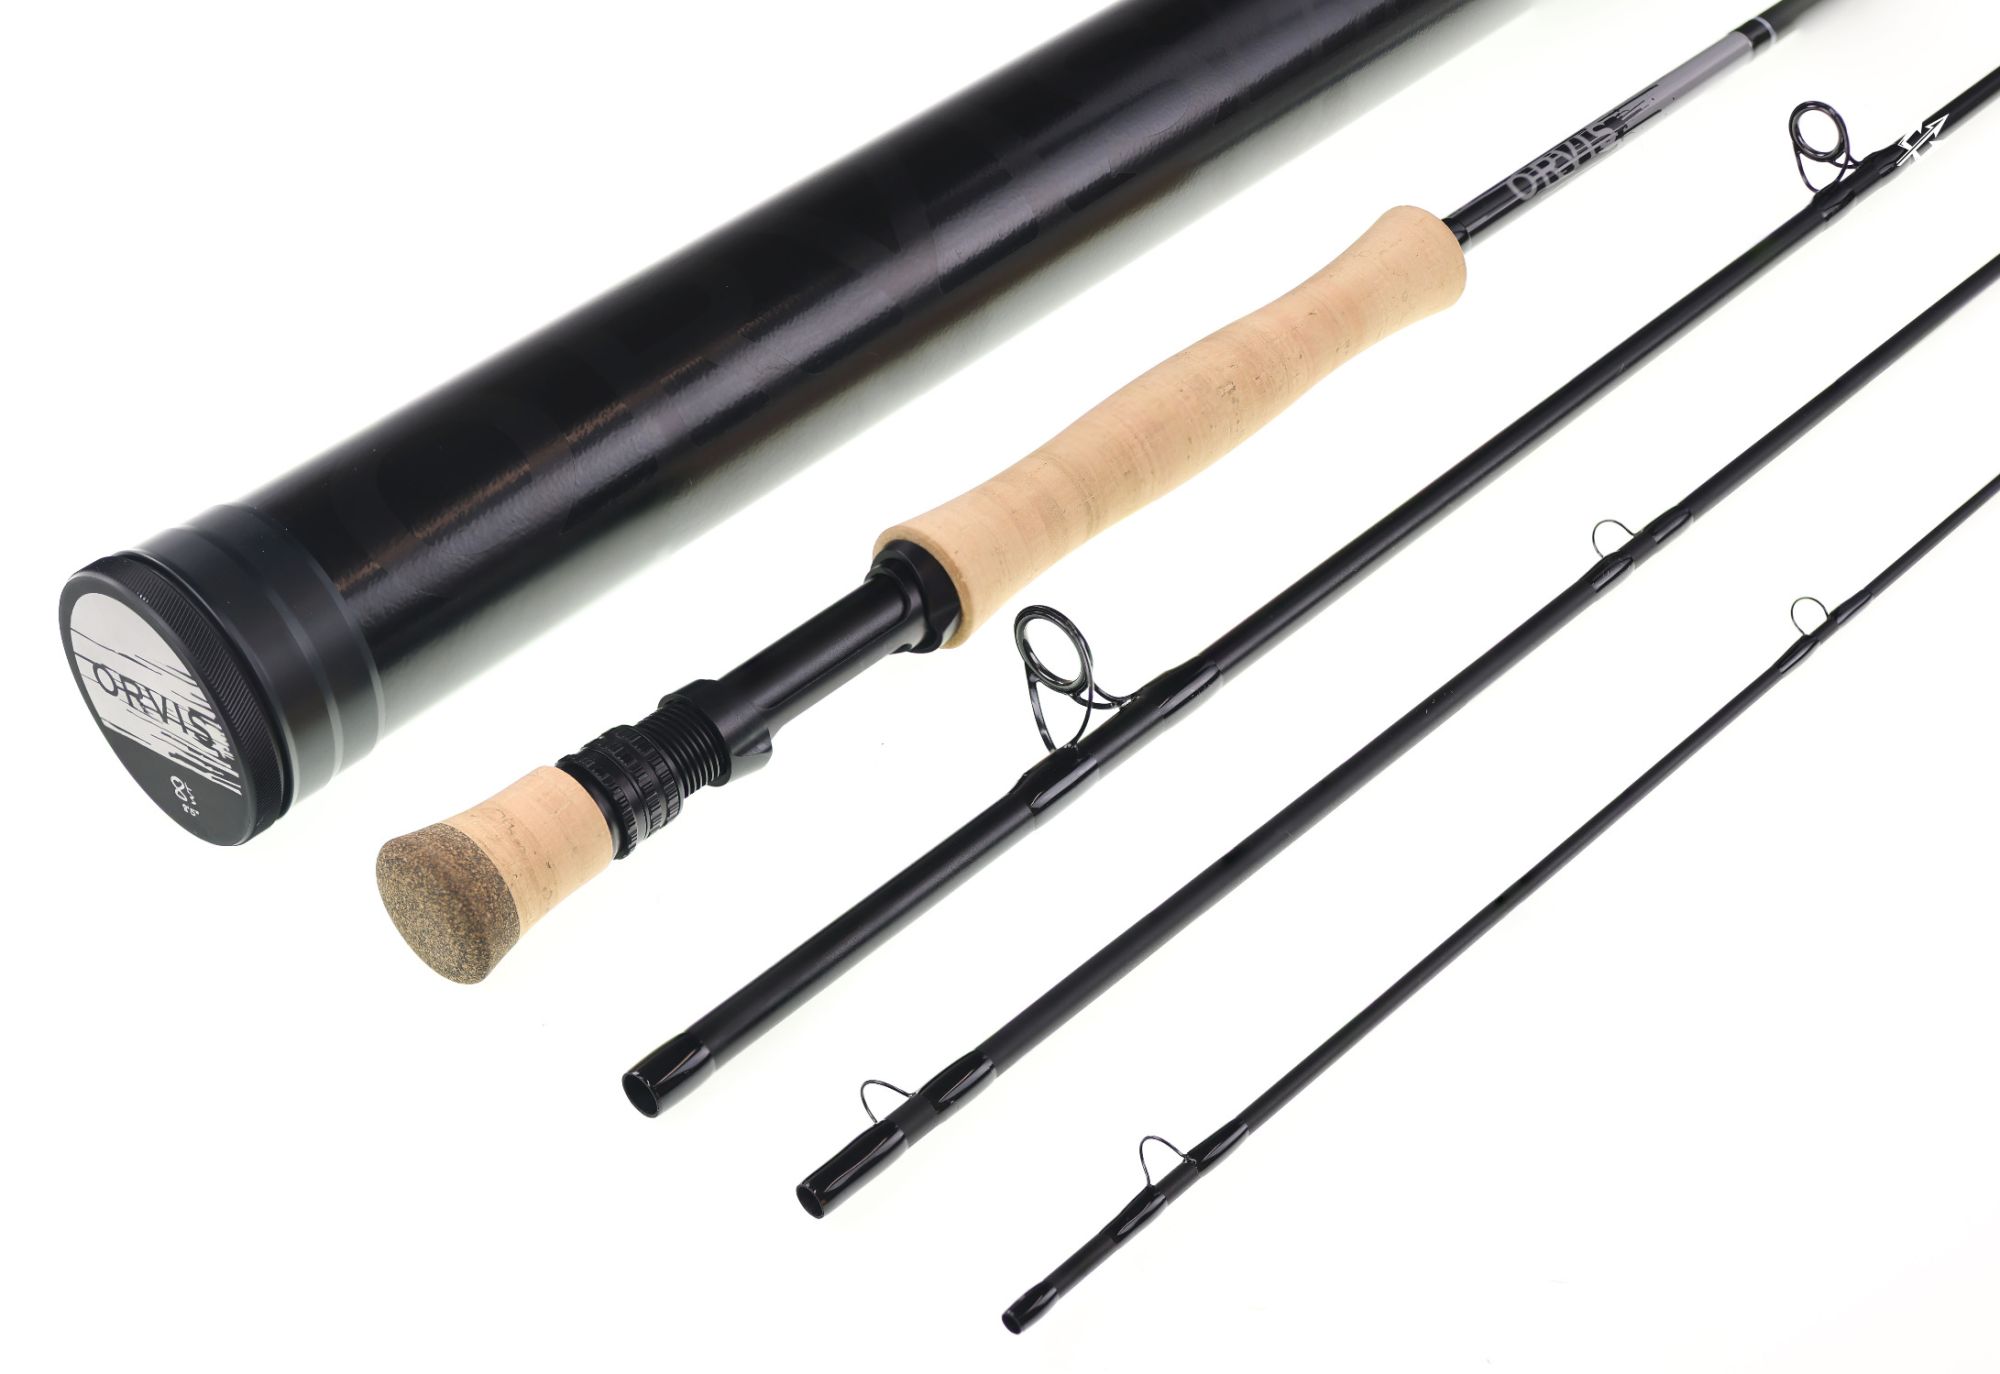 Orvis Helios 3 Blackout 8'5" 8-weight Fly Rod